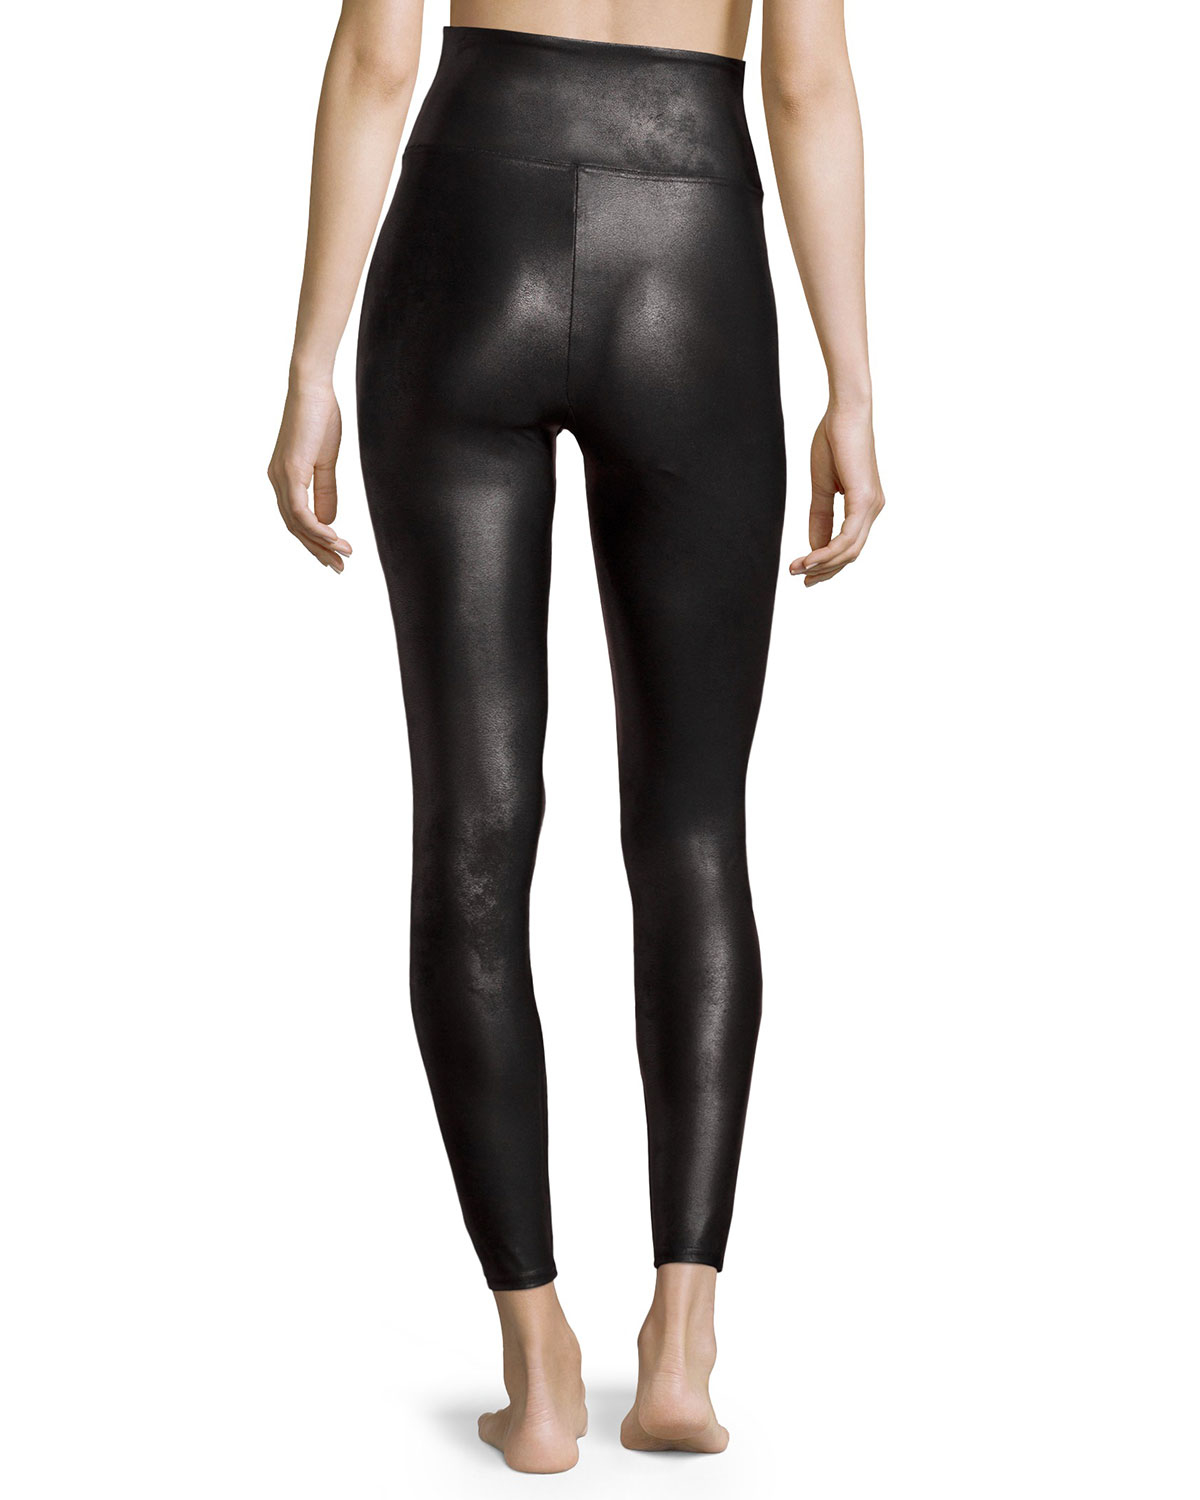 https://cdna.lystit.com/photos/fa8a-2015/09/03/spanx-black-ready-to-wow-faux-leather-leggings-product-1-128007835-normal.jpeg